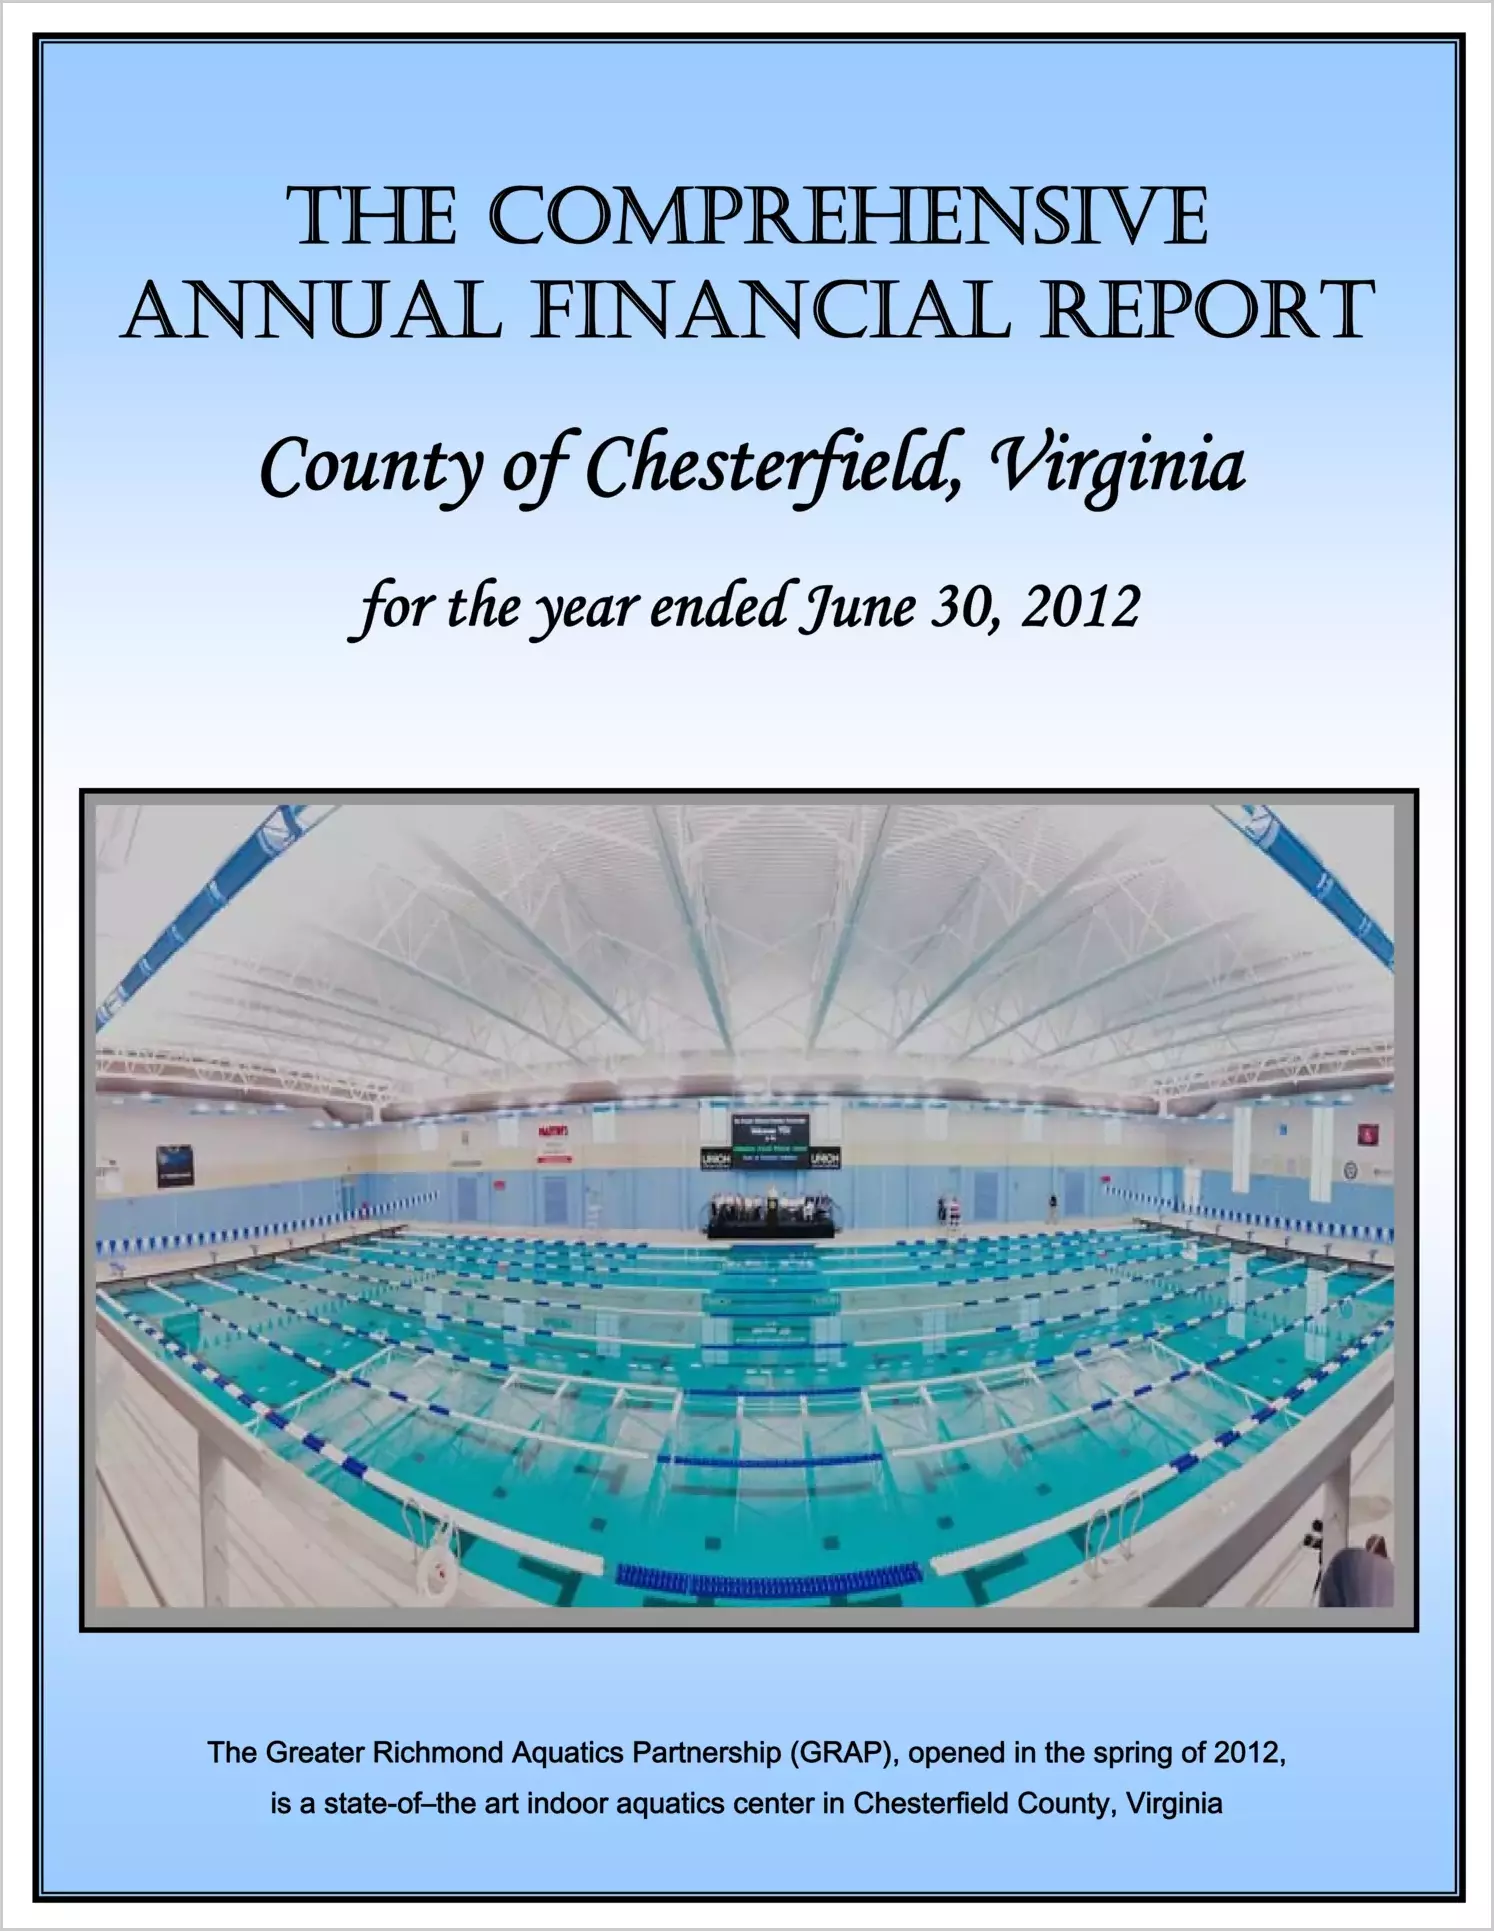 2012 Annual Financial Report for County of Chesterfield